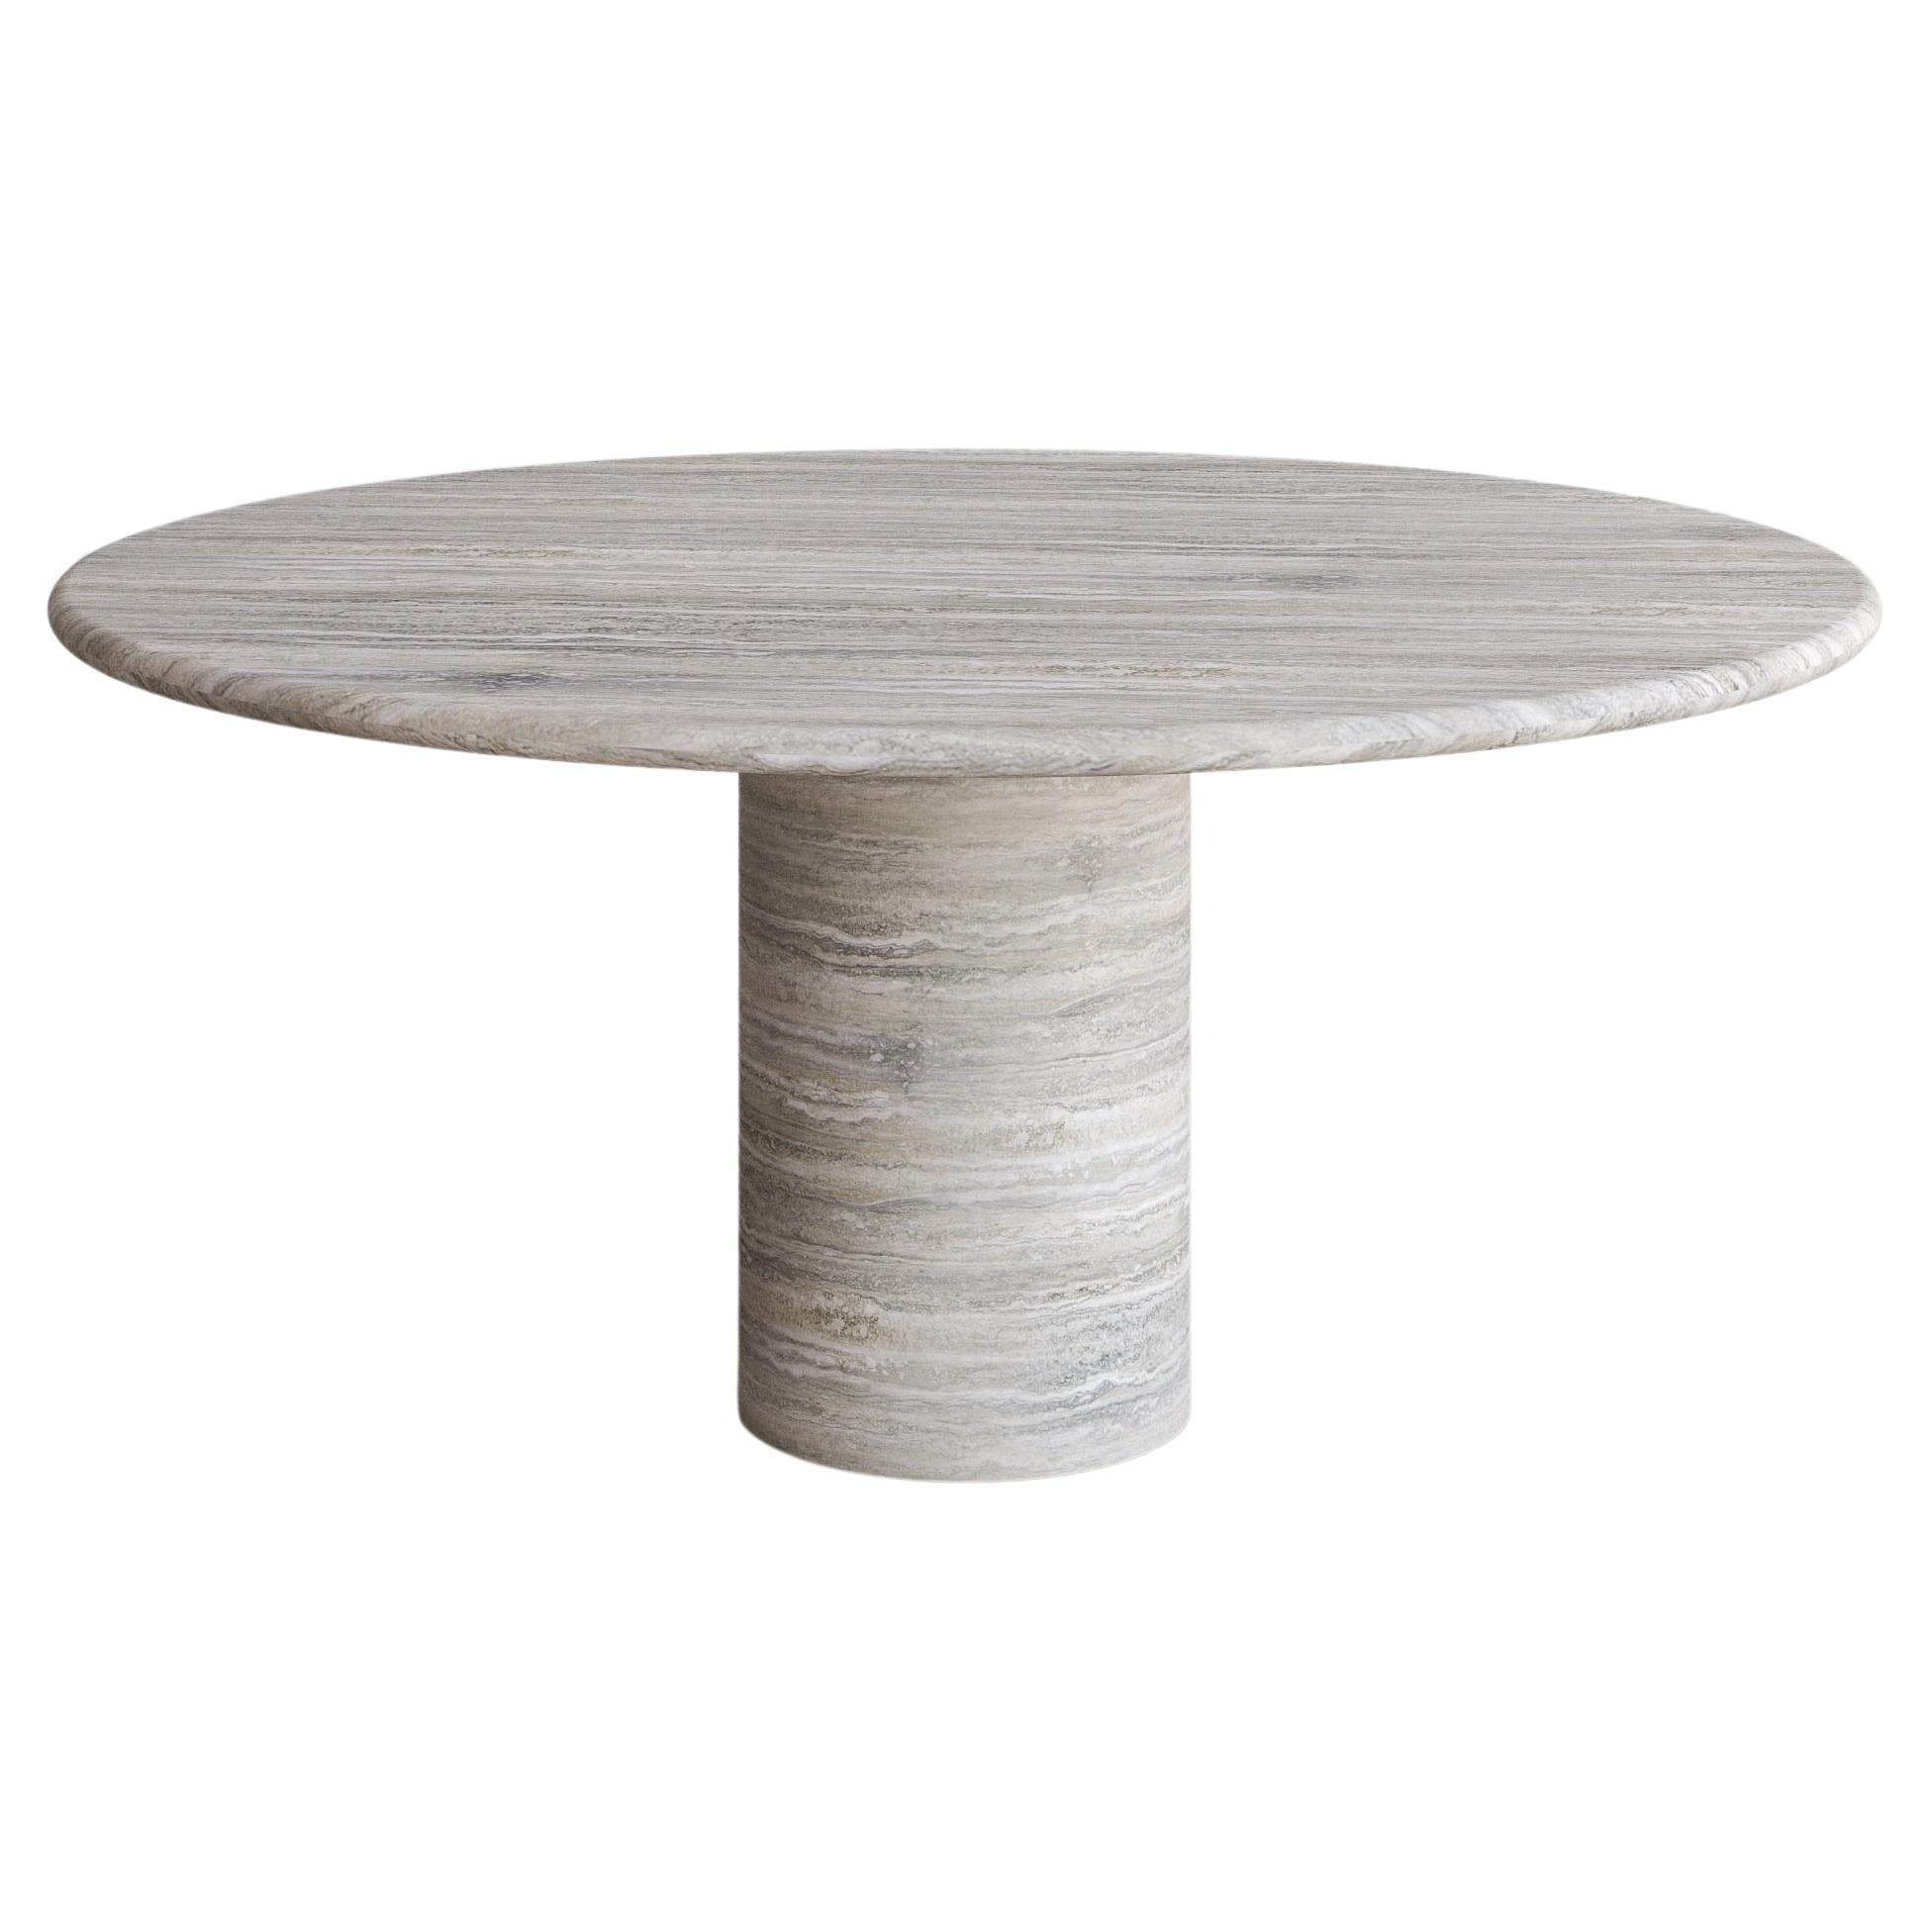 The Voyage Dining Table I in Silver Travertine with a honed finish by The Essentialist celebrates the simple pleasures that define life and replenish the soul through harnessing essential form. Envisioned as an ode to historical elegance, captured